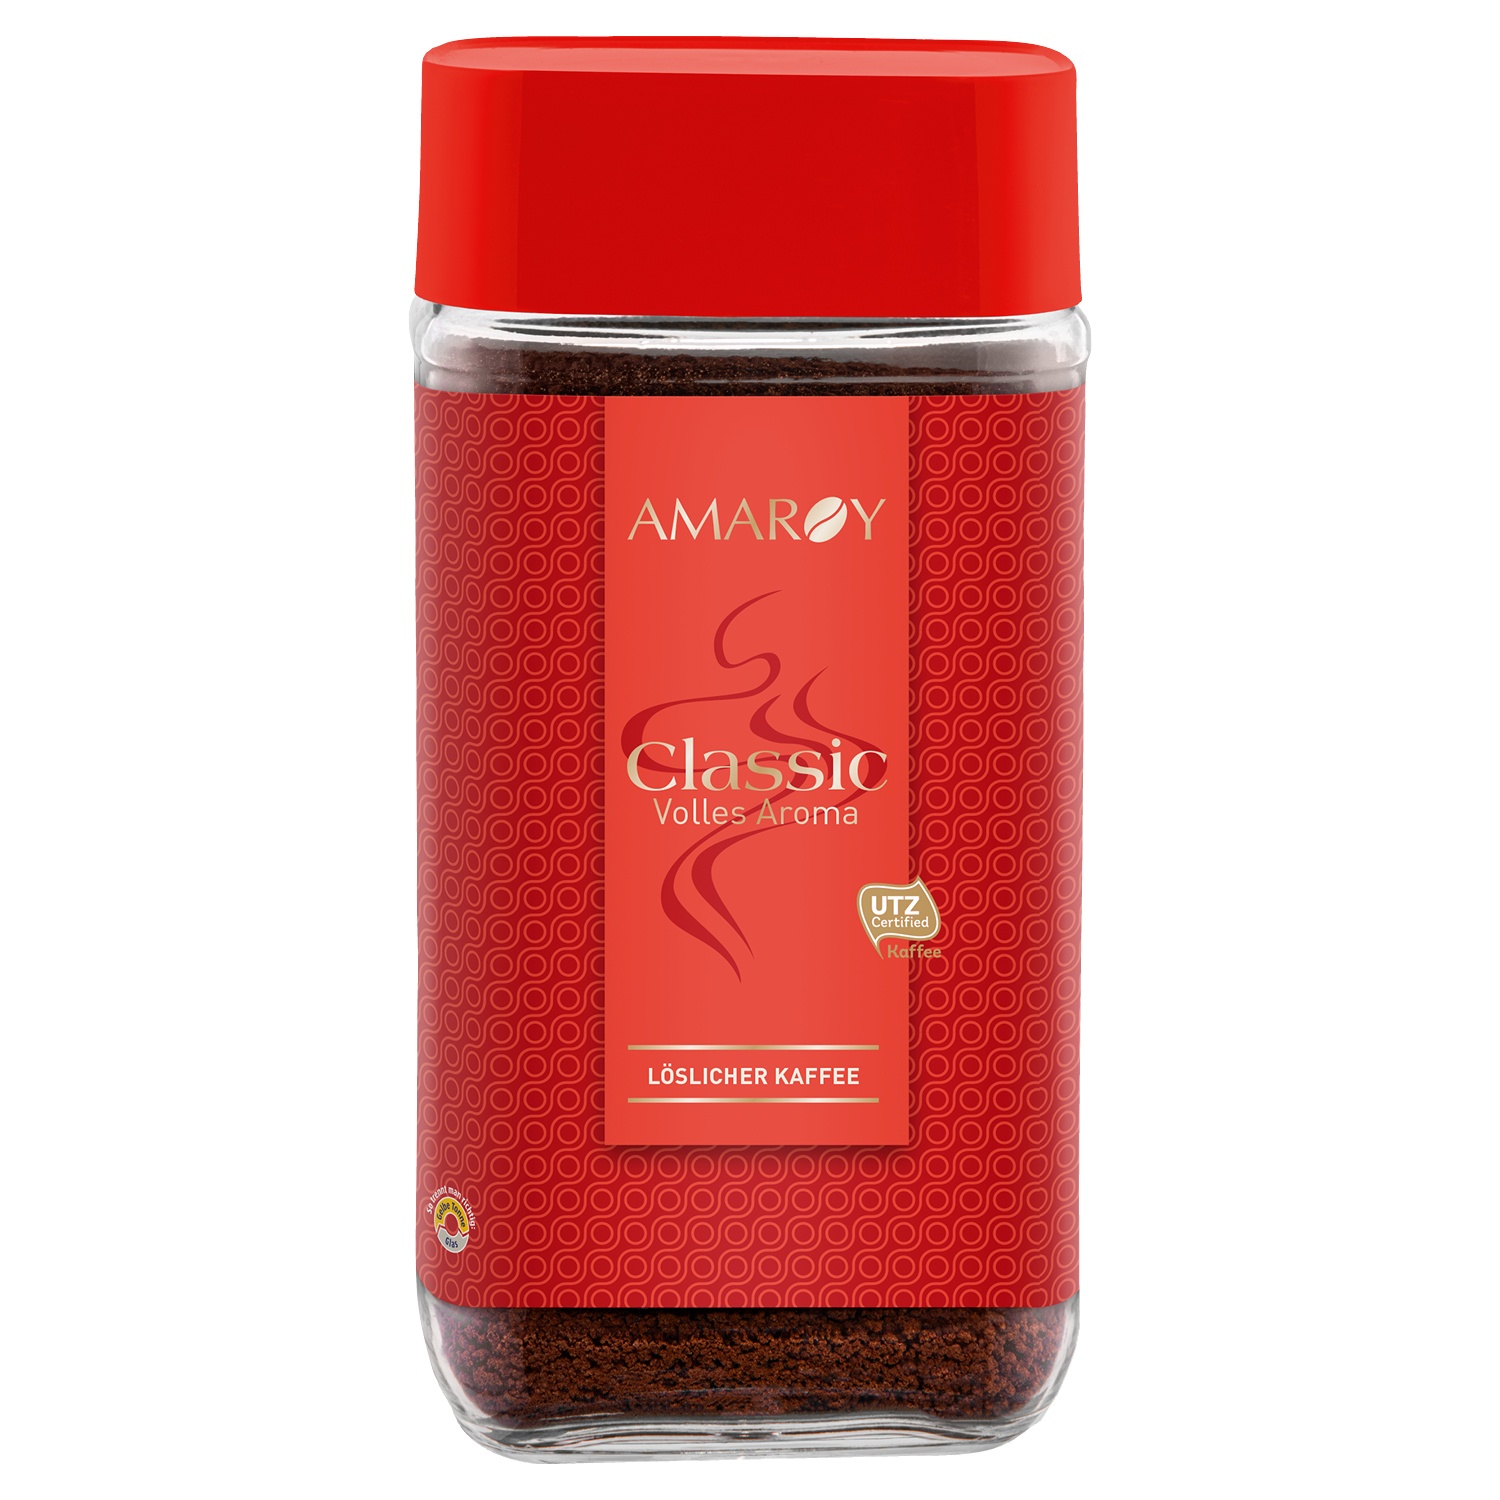 AMAROY Express Kaffee Classic volles Aroma 200 g